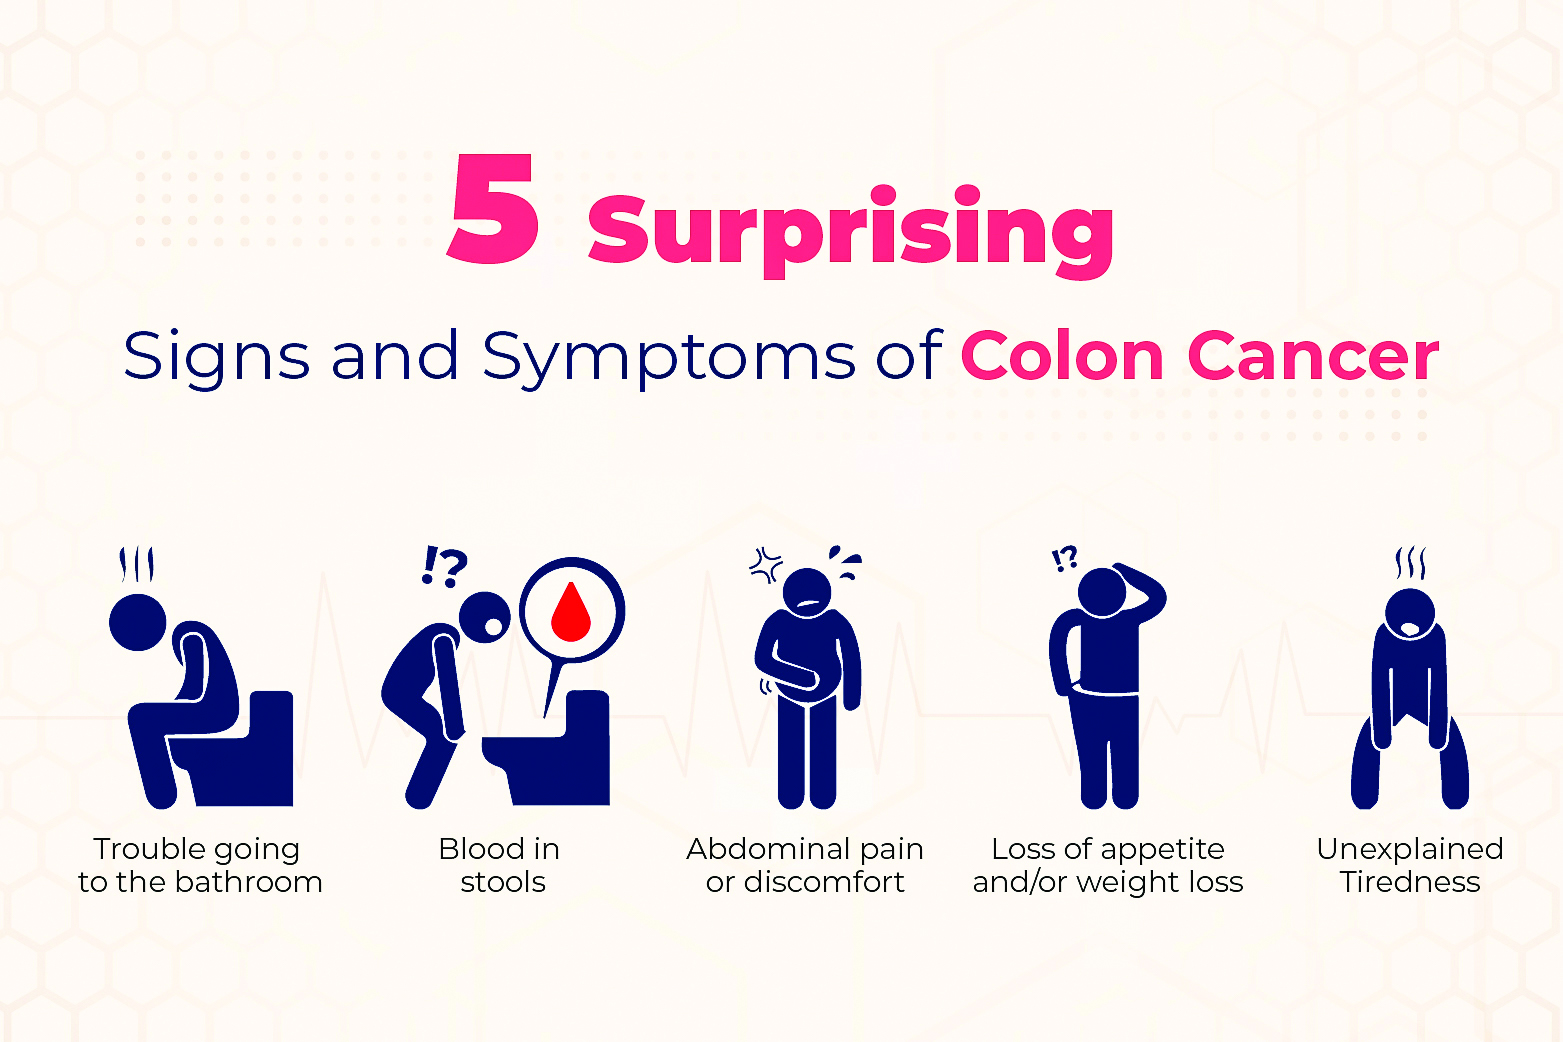 Why are young people getting prone to colon cancer?